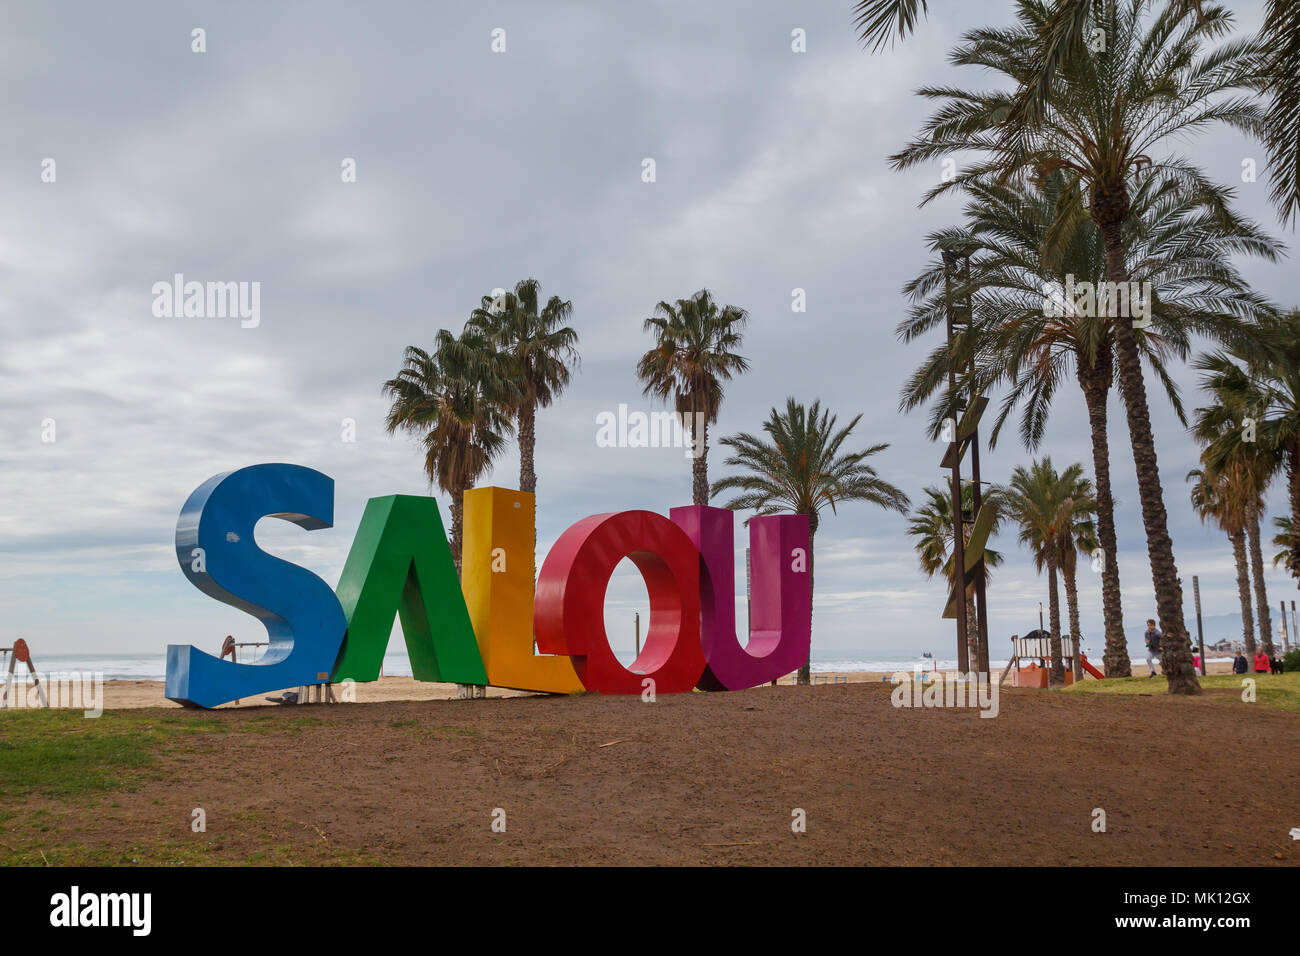 Colorful text in Llevant beach in Salou, a major tourist destination at summer, in the Catalan Costa Dorada Stock Photo